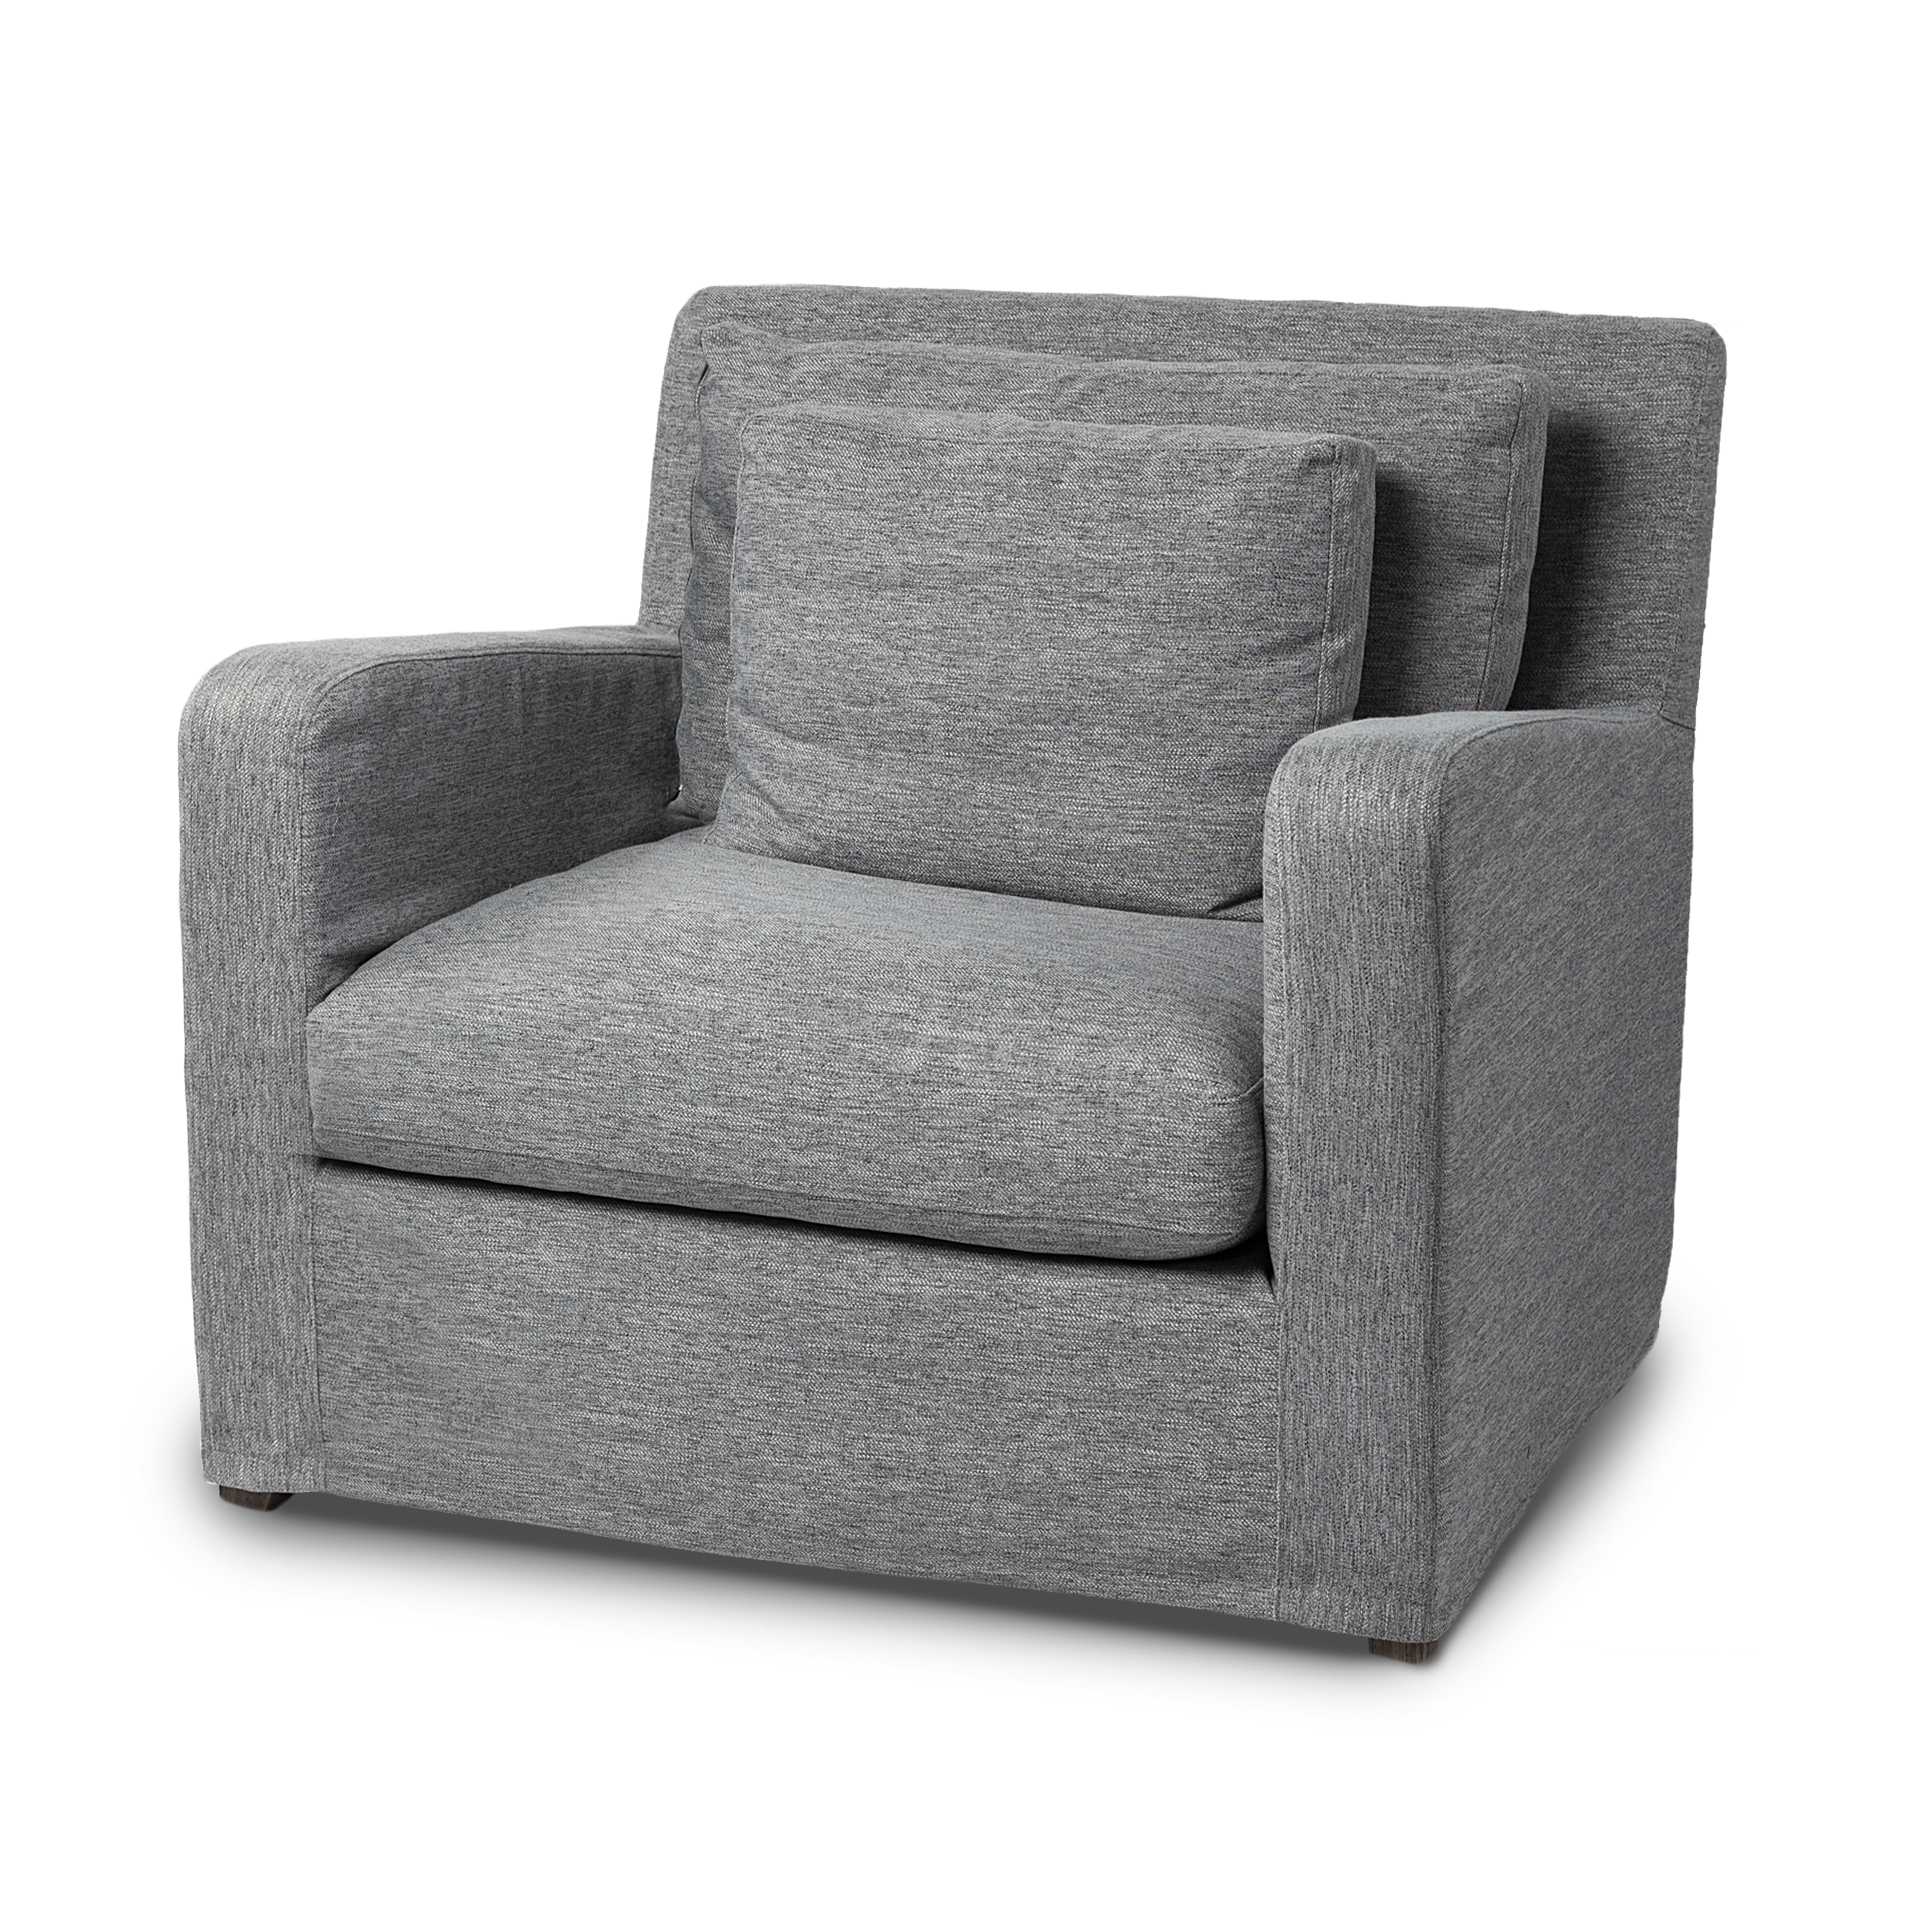 Castlerock Gray Slipcover Upholstered Fabric Seating Wide Accent chair w/ Wooden Frame and Legs